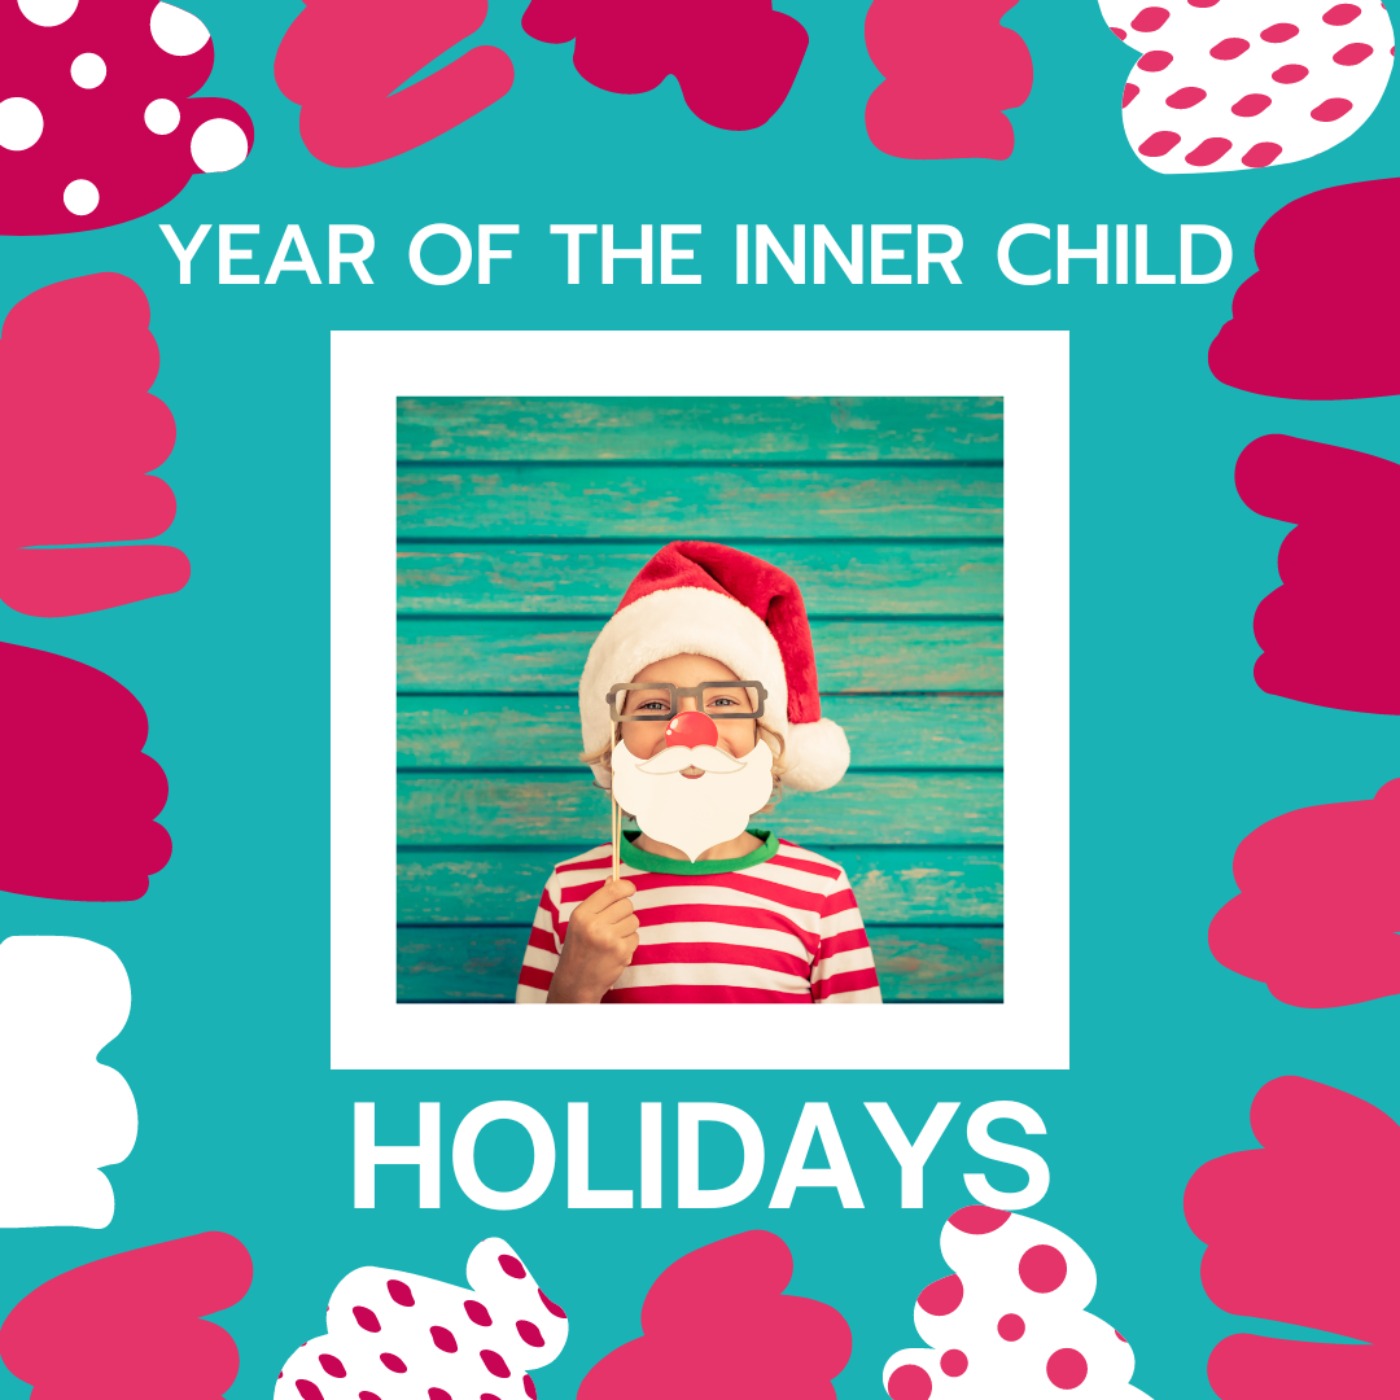 Year of the Inner Child: Holidays